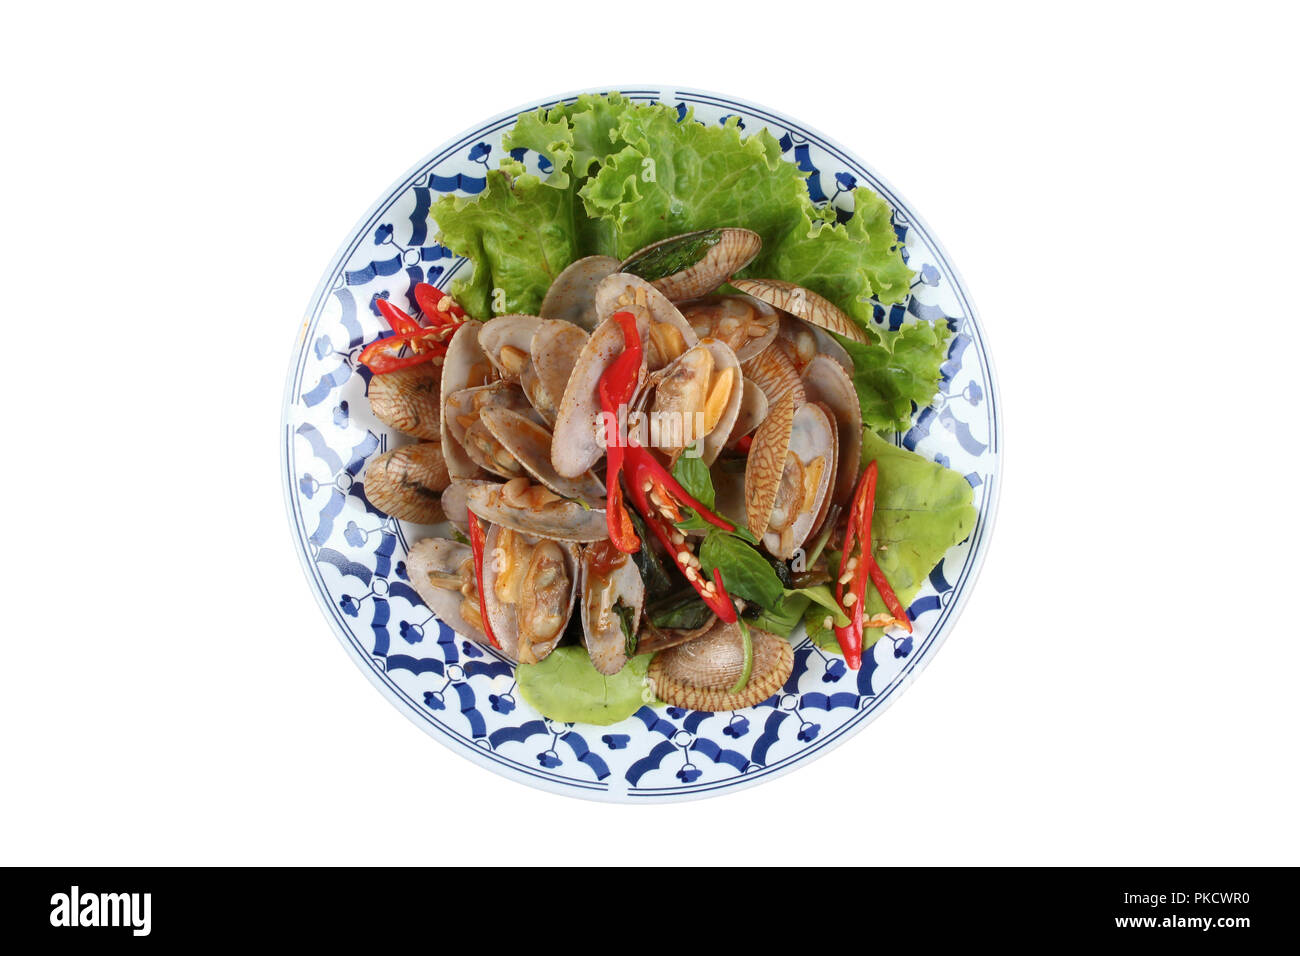 Isolated  of Stir fried clams with roasted chile paste call Hoi Lai Pad Prik Phao. Stock Photo